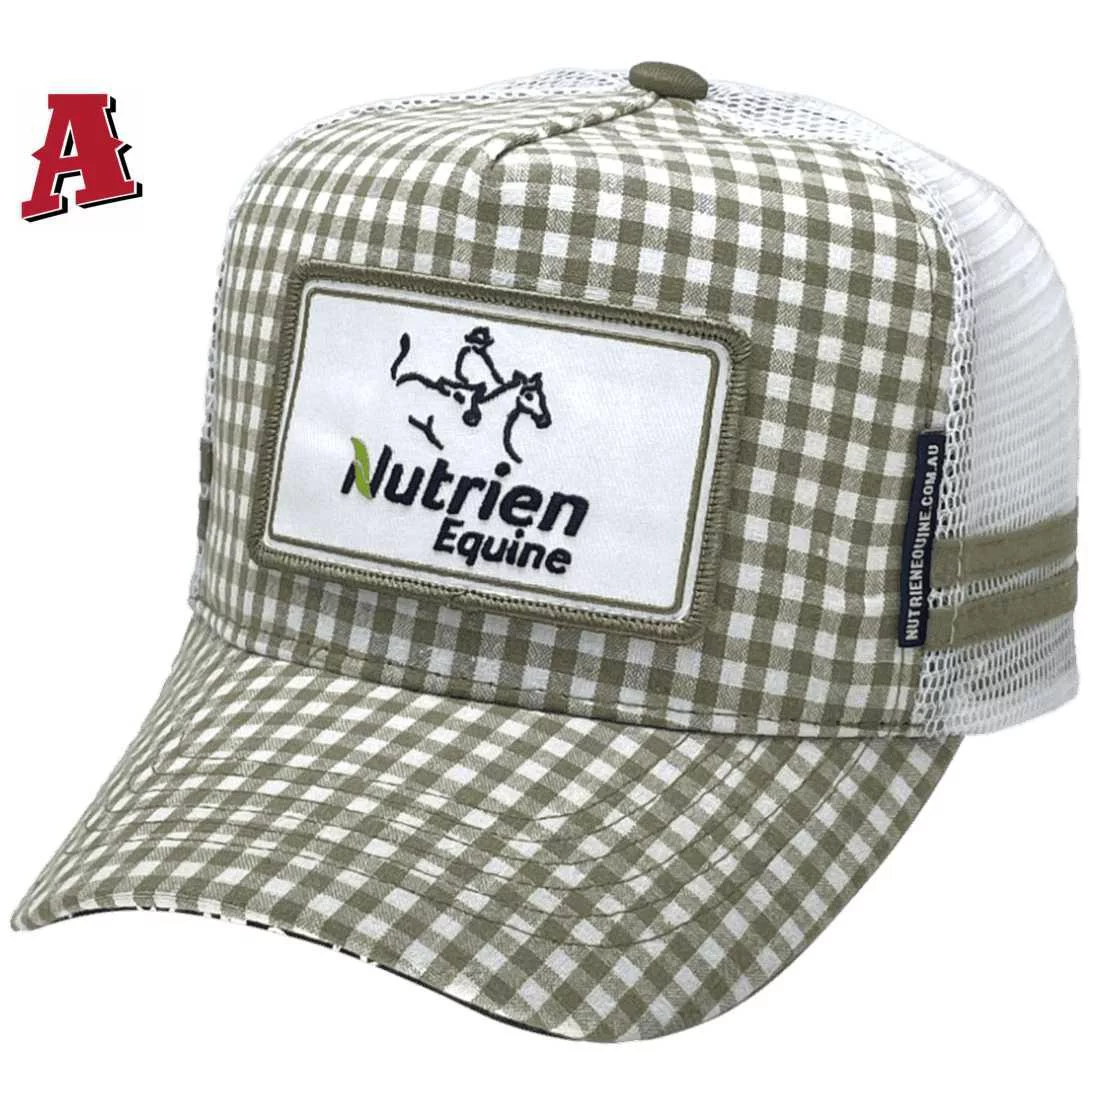 Nutrien Equine Tamworth Gingham Olive HP Midrange Aussie Trucker Hats with Australian Head Fit Crown and Double SideBands - Olive Gingham White